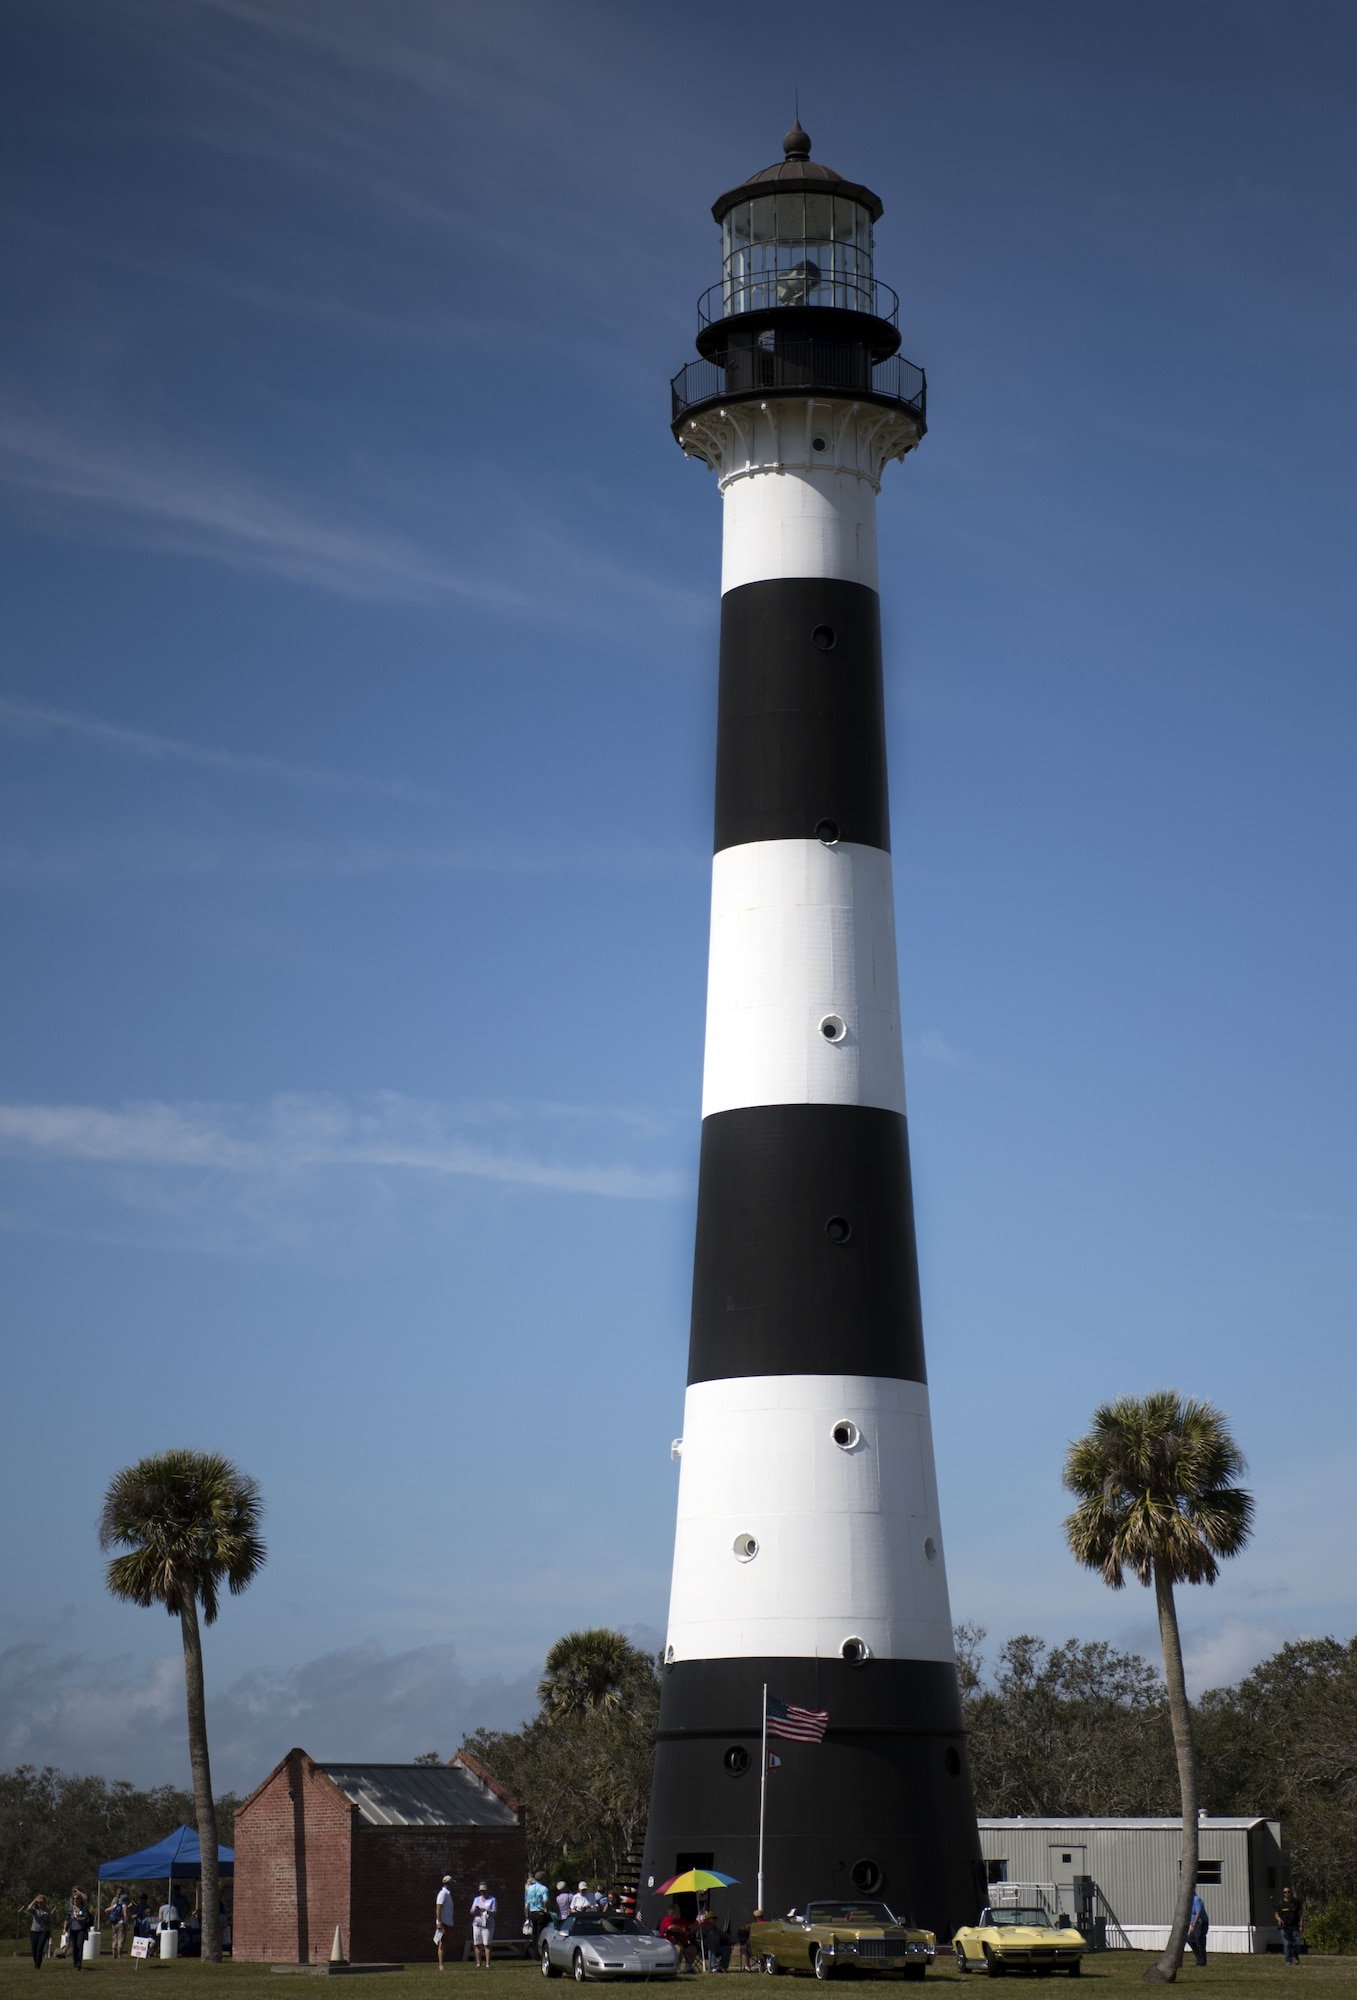 The Cape Canaveral Lighthouse Foundation hosted a festival on Feb. 10, 2018, to celebrate the 150th anniversary of the lighthouse at Cape Canaveral Air Force Station, Fla. (U.S. Air Force by Airman Zoe Thacker)